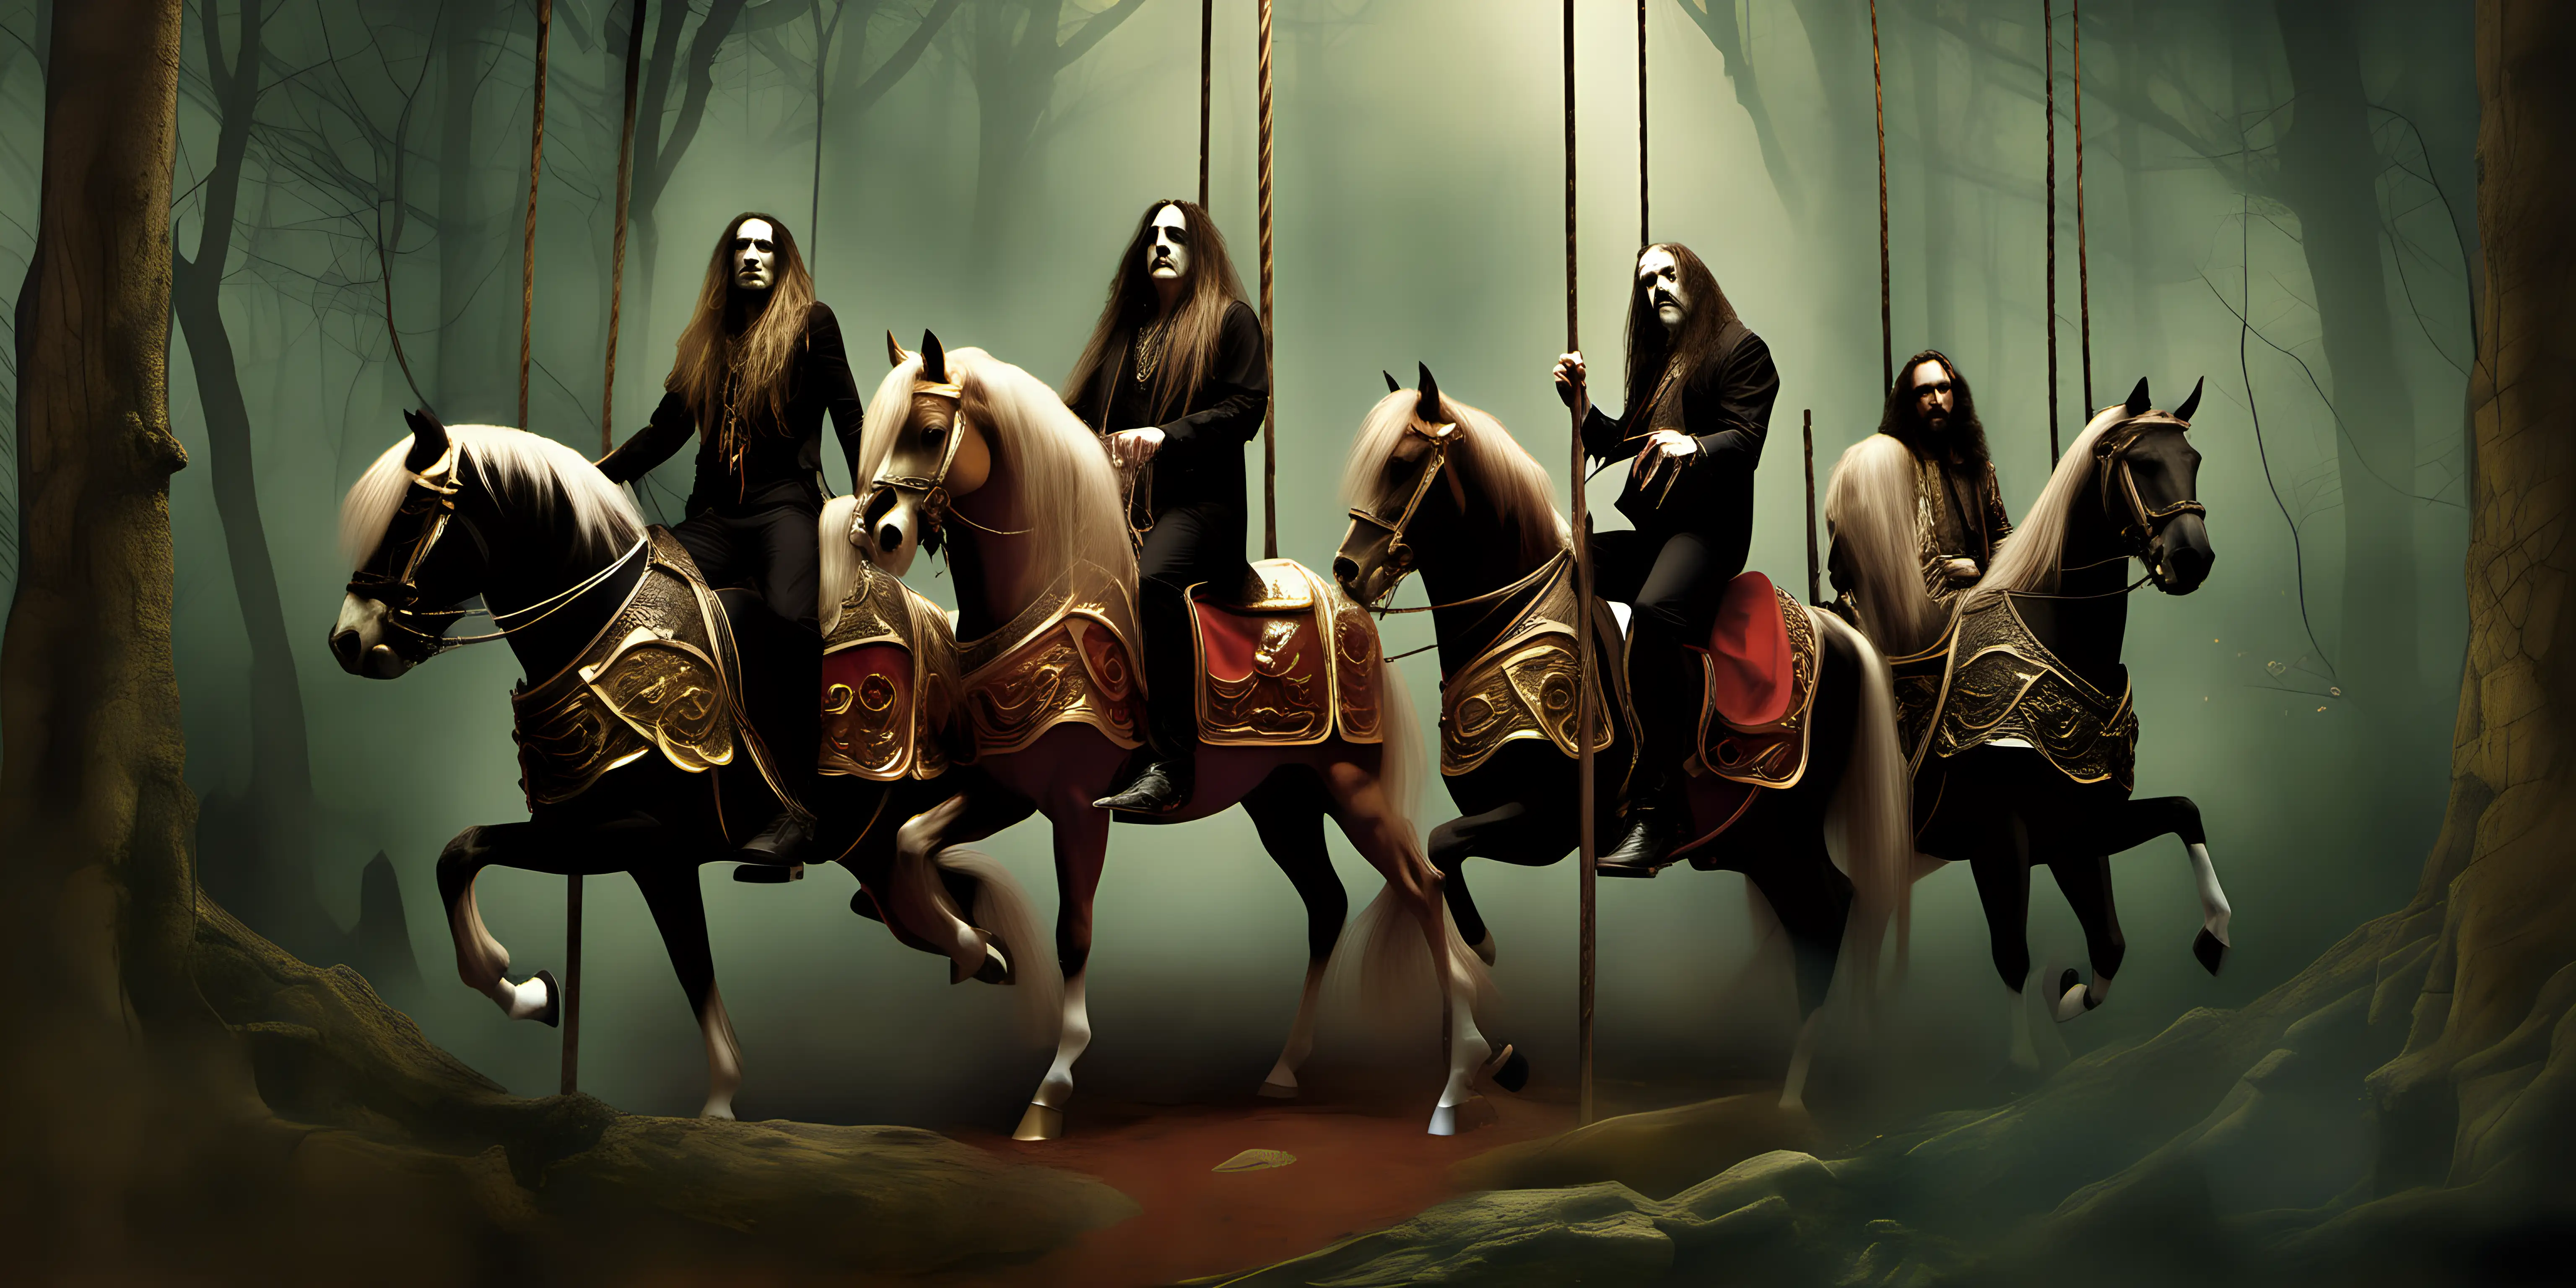 a pagan rock band , they have long hair & are in an ancient forest they are riding on a circus carousel